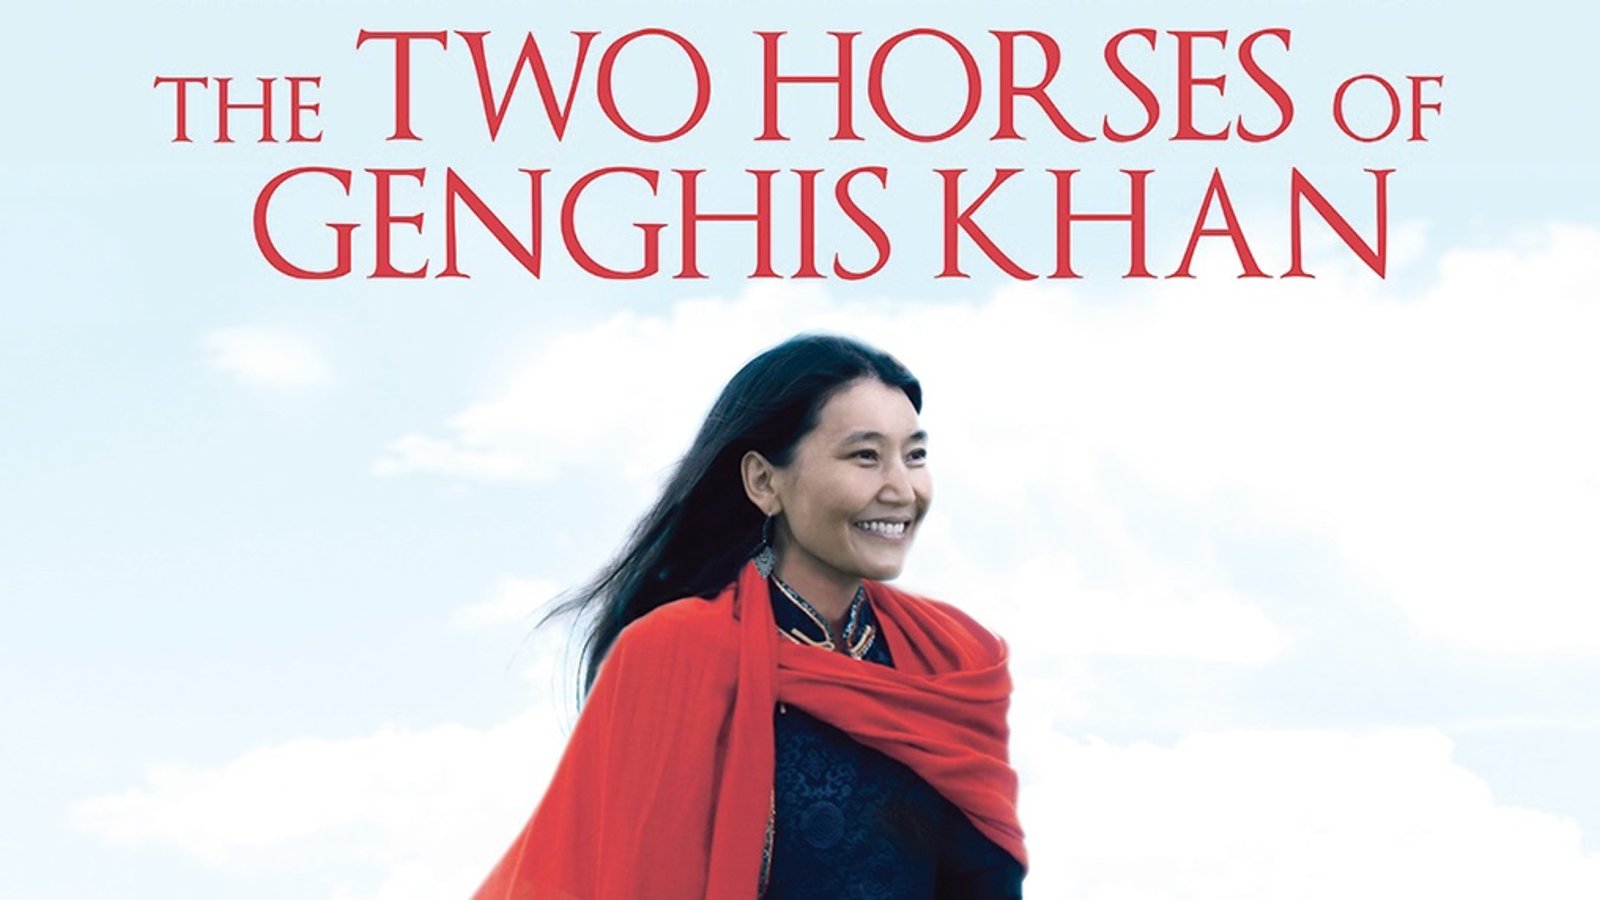 The Two Horses of Genghis Khan - A Mongolian Woman Searches for Pieces of Her Heritage